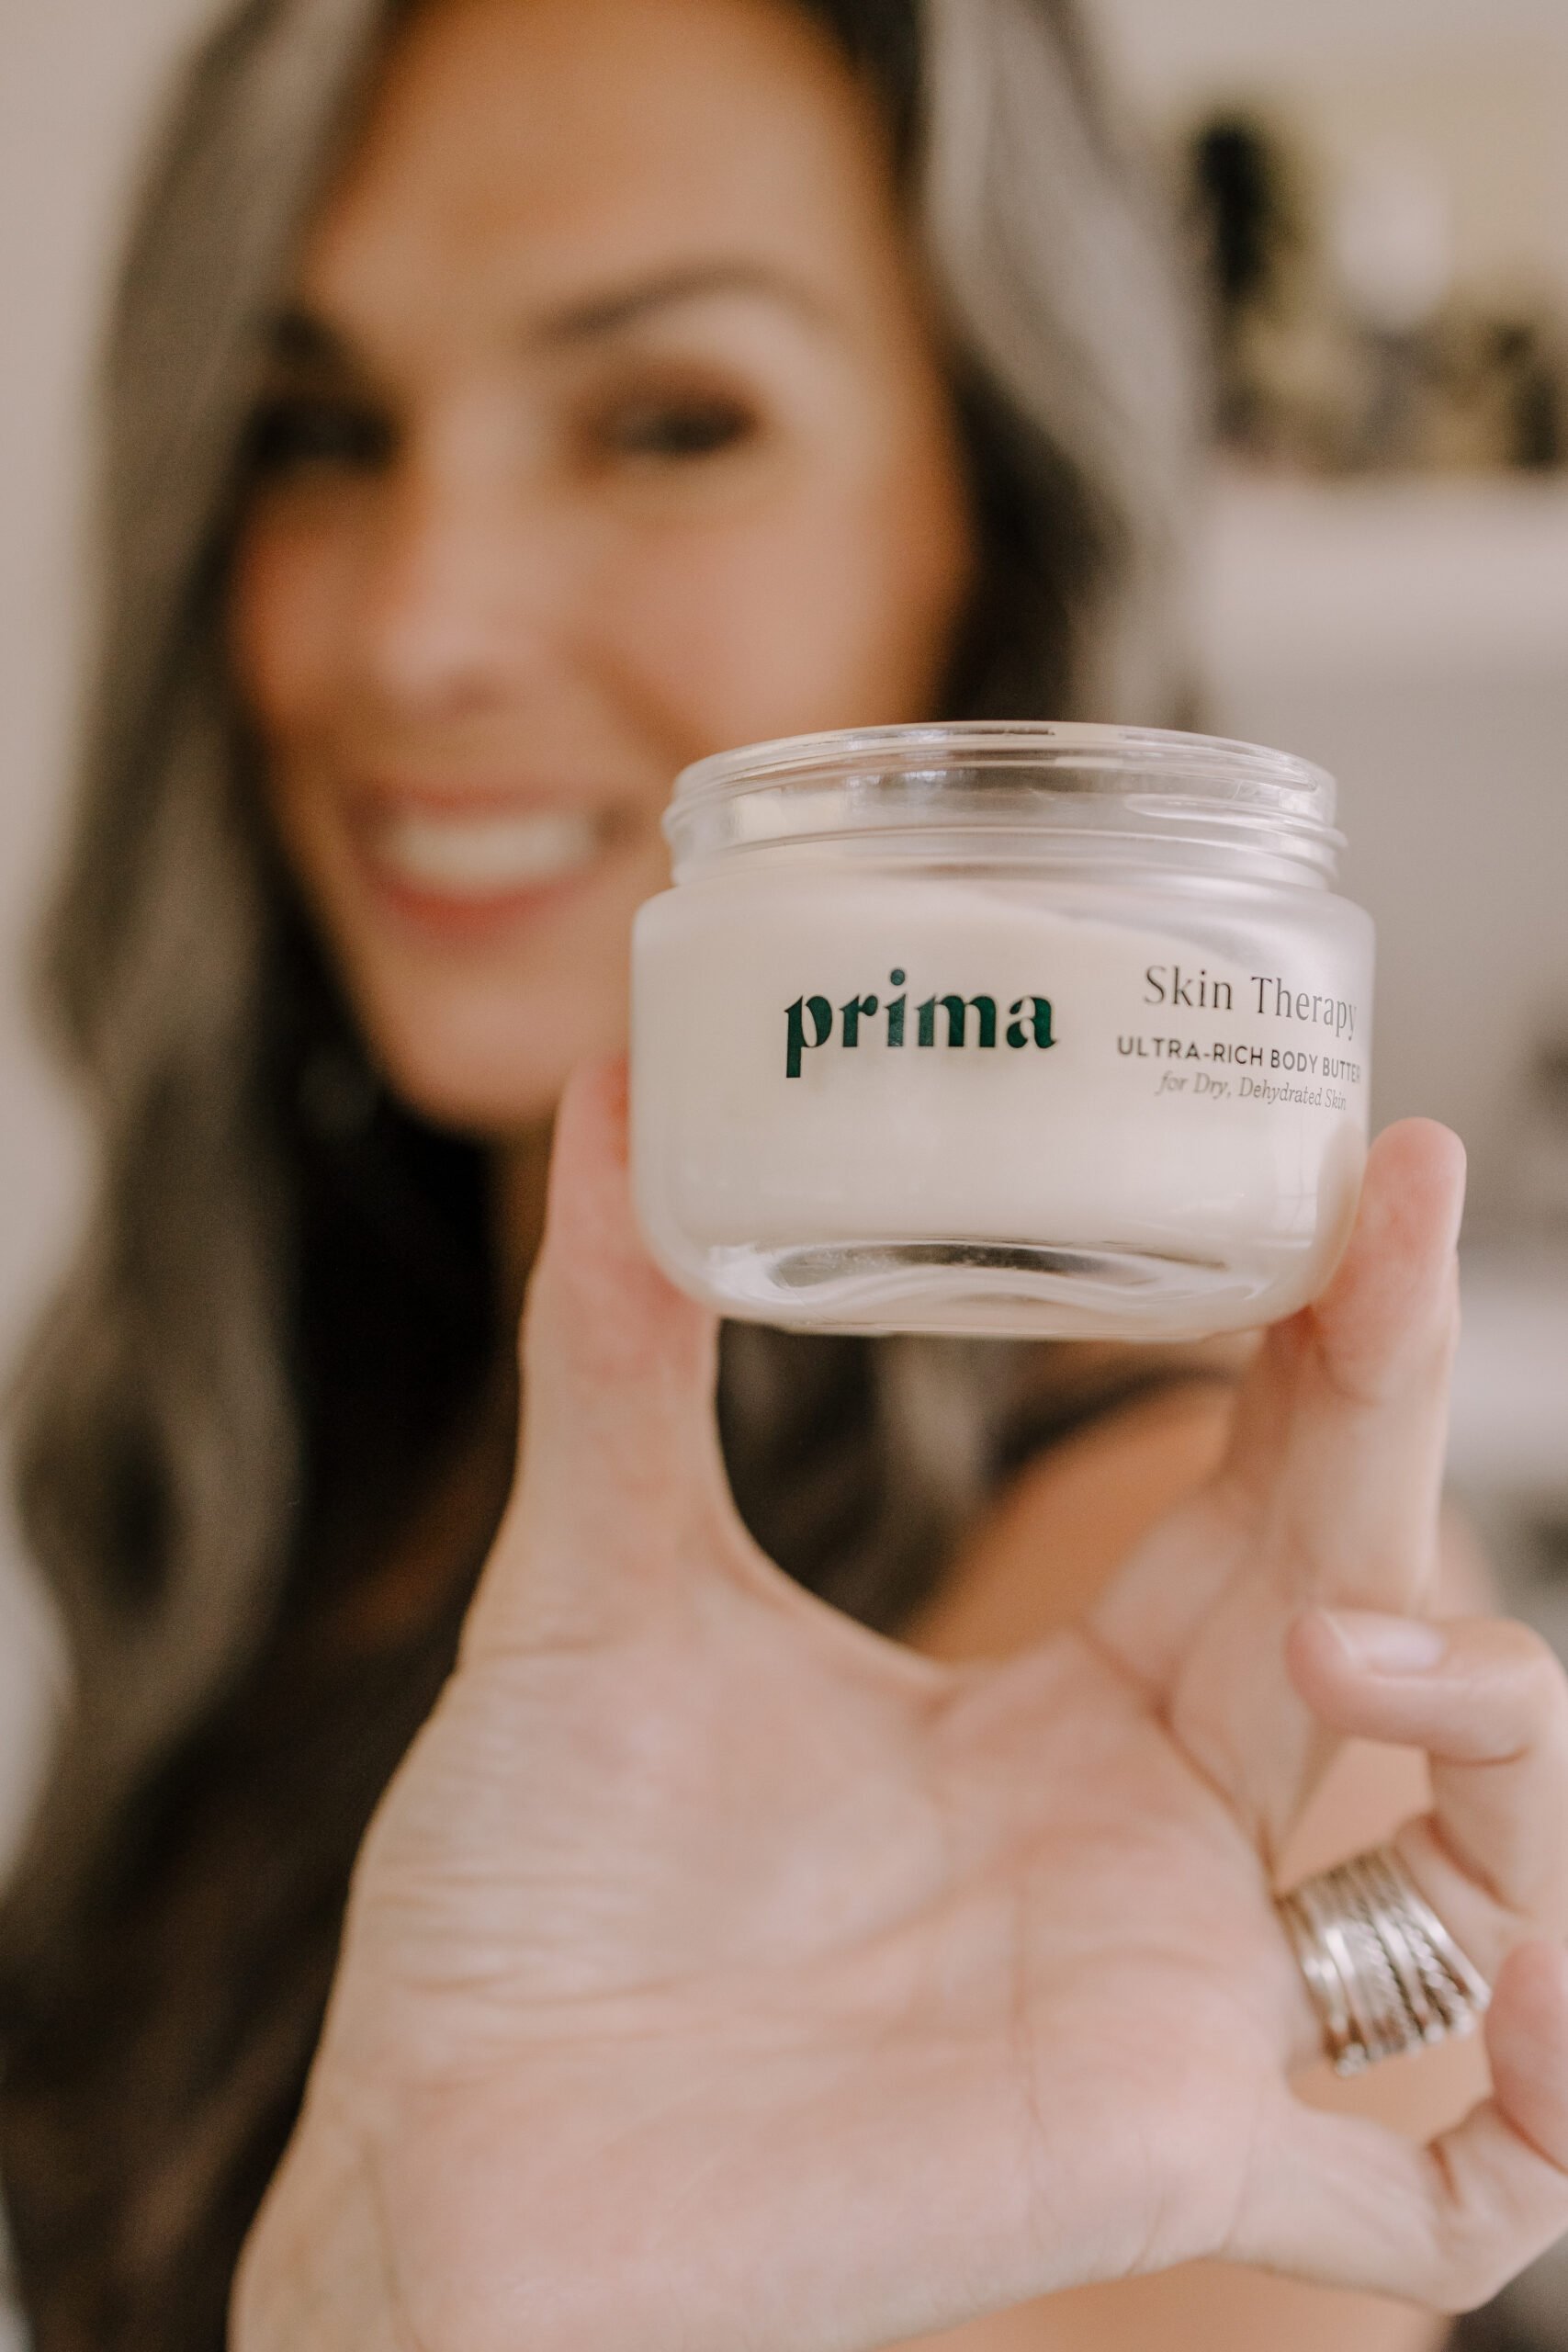 a woman is blurry in the background while in the foreground is an opened tub of Prima's Skin Therapy that the woman is holding up